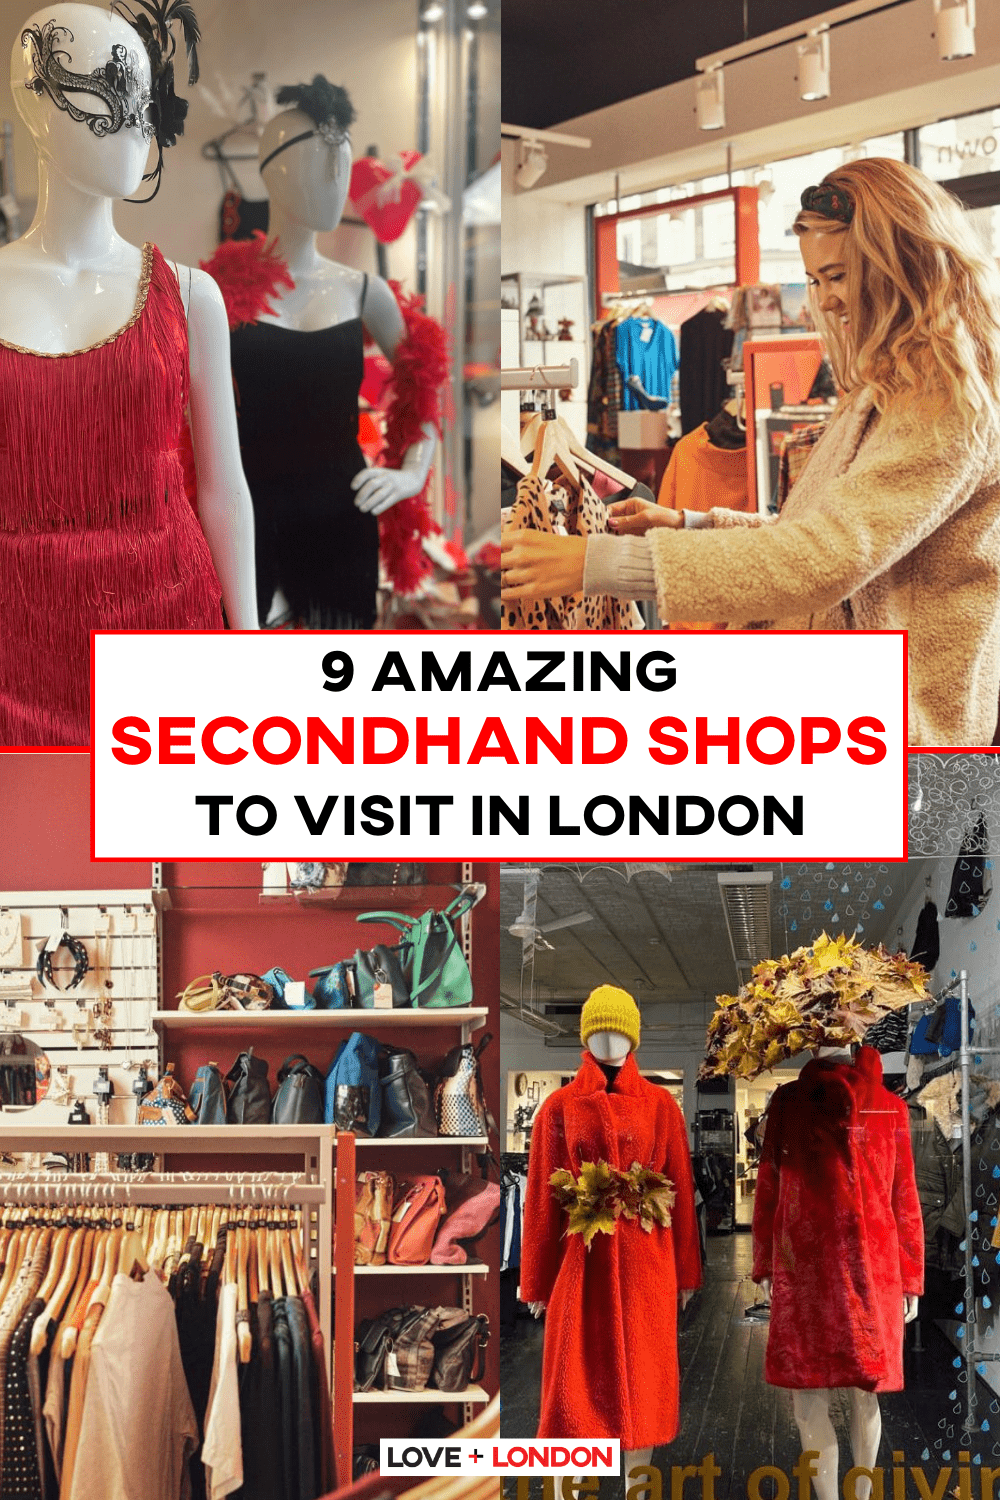 9 Amazing Secondhand Shops to Visit in London